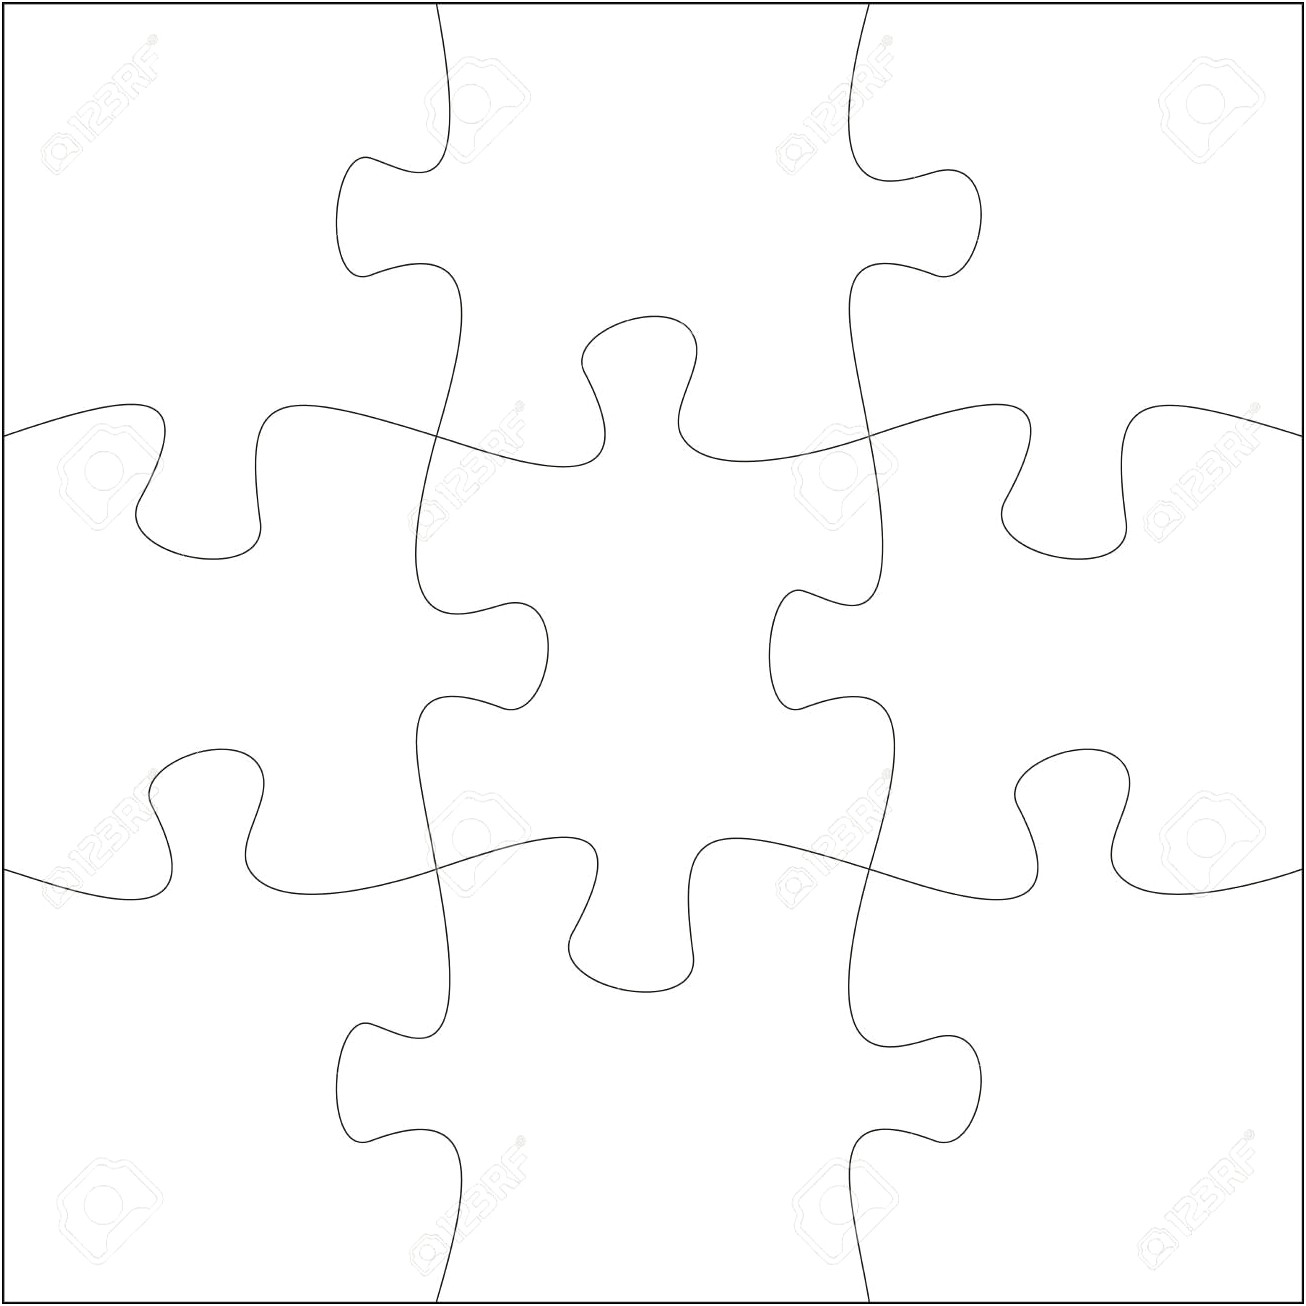 Free Printable Puzzle Template With 9 Pieces